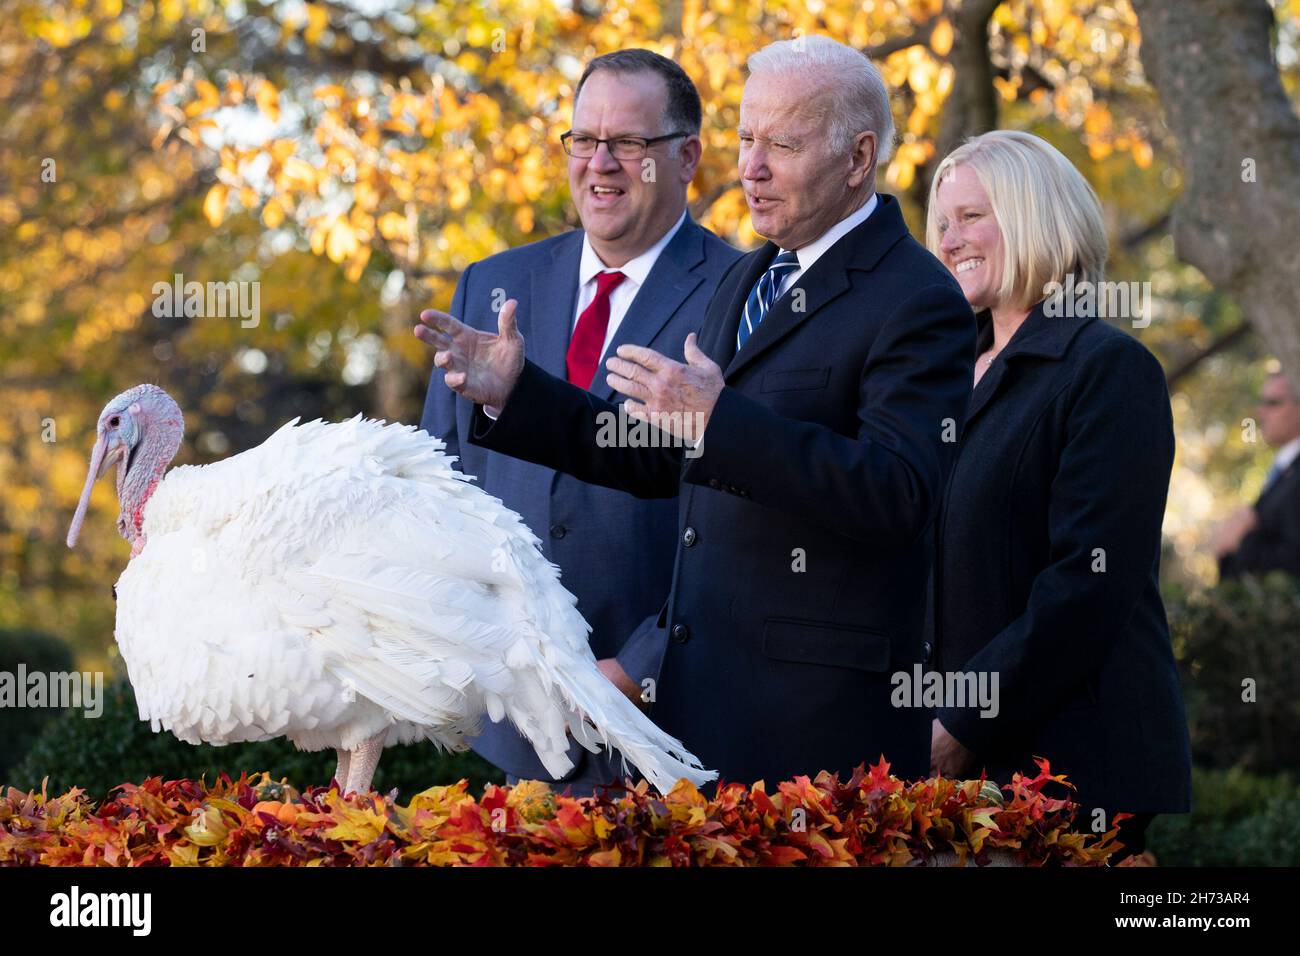 United States President Joe Biden (C) pardons the National Thanksgiving Turkey 'Peanut Butter' during the 74th National Thanksgiving Turkey presentation in the Rose Garden of the White House, beside chairman of the National Turkey Federation Phil Seger (L) and turkey-grower Adrea Welp (R) of Indiana, in Washington, DC, USA, 19 November 2021. The 2021 National Thanksgiving Turkey and its alternate, named 'Peanut Butter' and 'Jelly' respectively, were raised near Jasper, Indiana. The pardoning ceremony is an annual tradition held ahead of the Thanksgiving holiday. Credit: Michael Reynolds/Pool Stock Photo